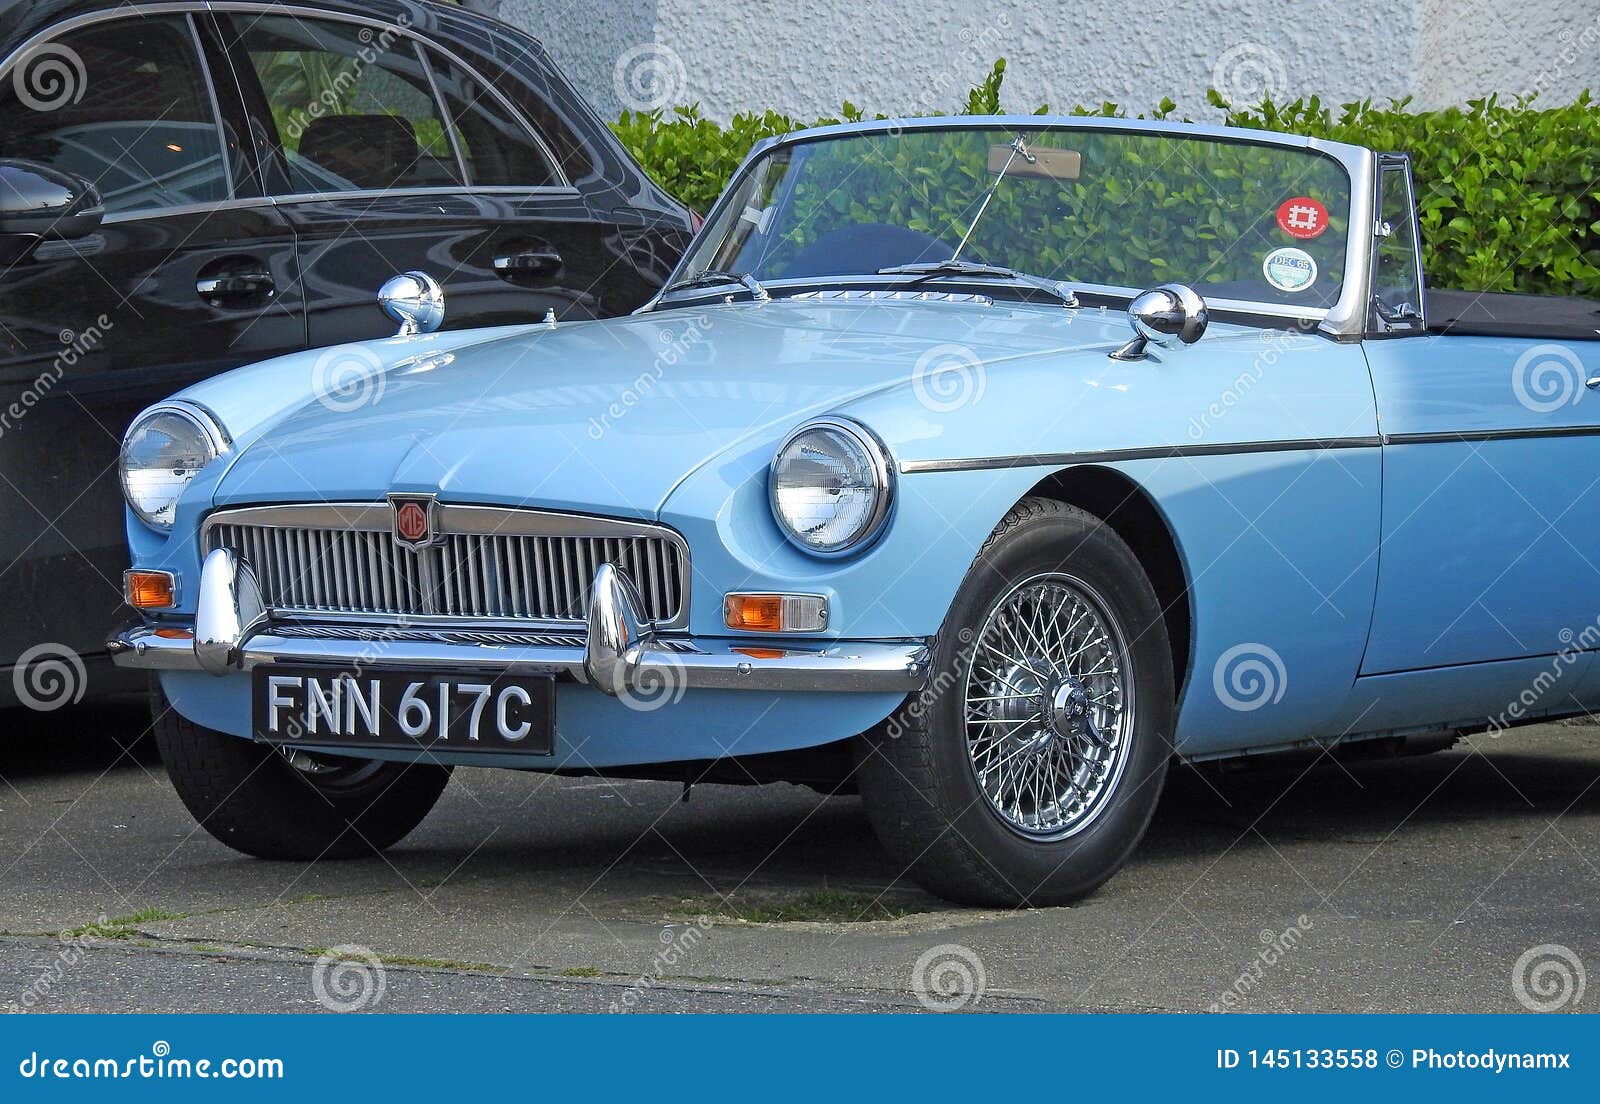 Vintage Classic Mg Car Vehicle Convertible Parked Editorial Stock Photo -  Image of drive, kent: 145133558